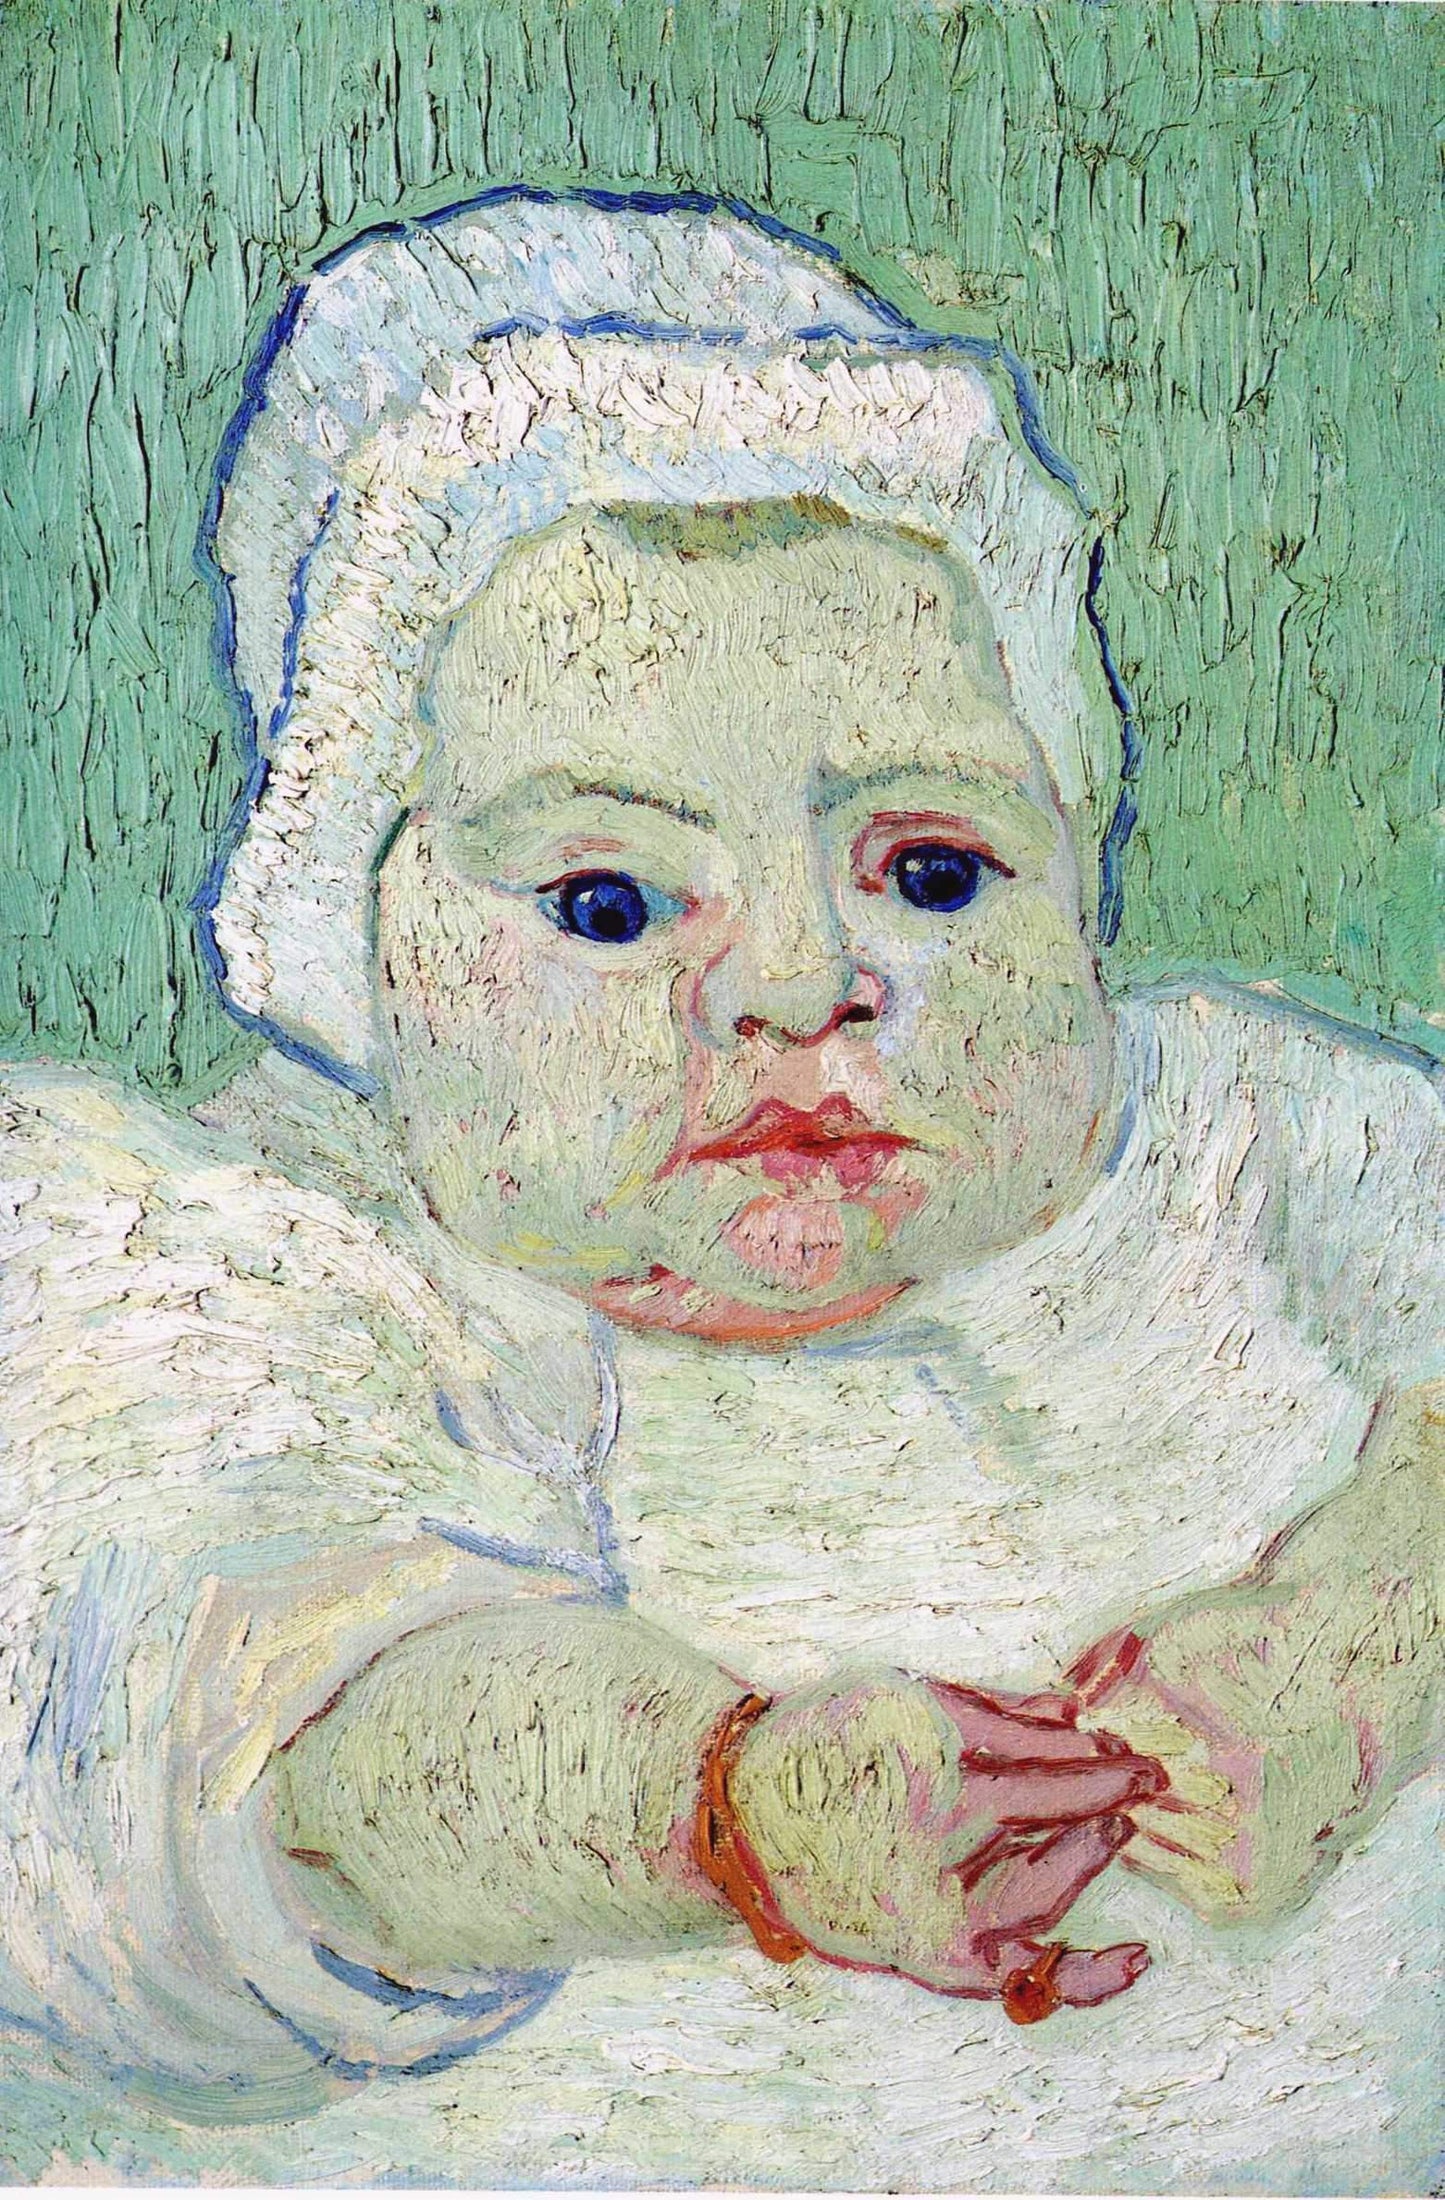 Marcelle Roulin's Baby, 1888